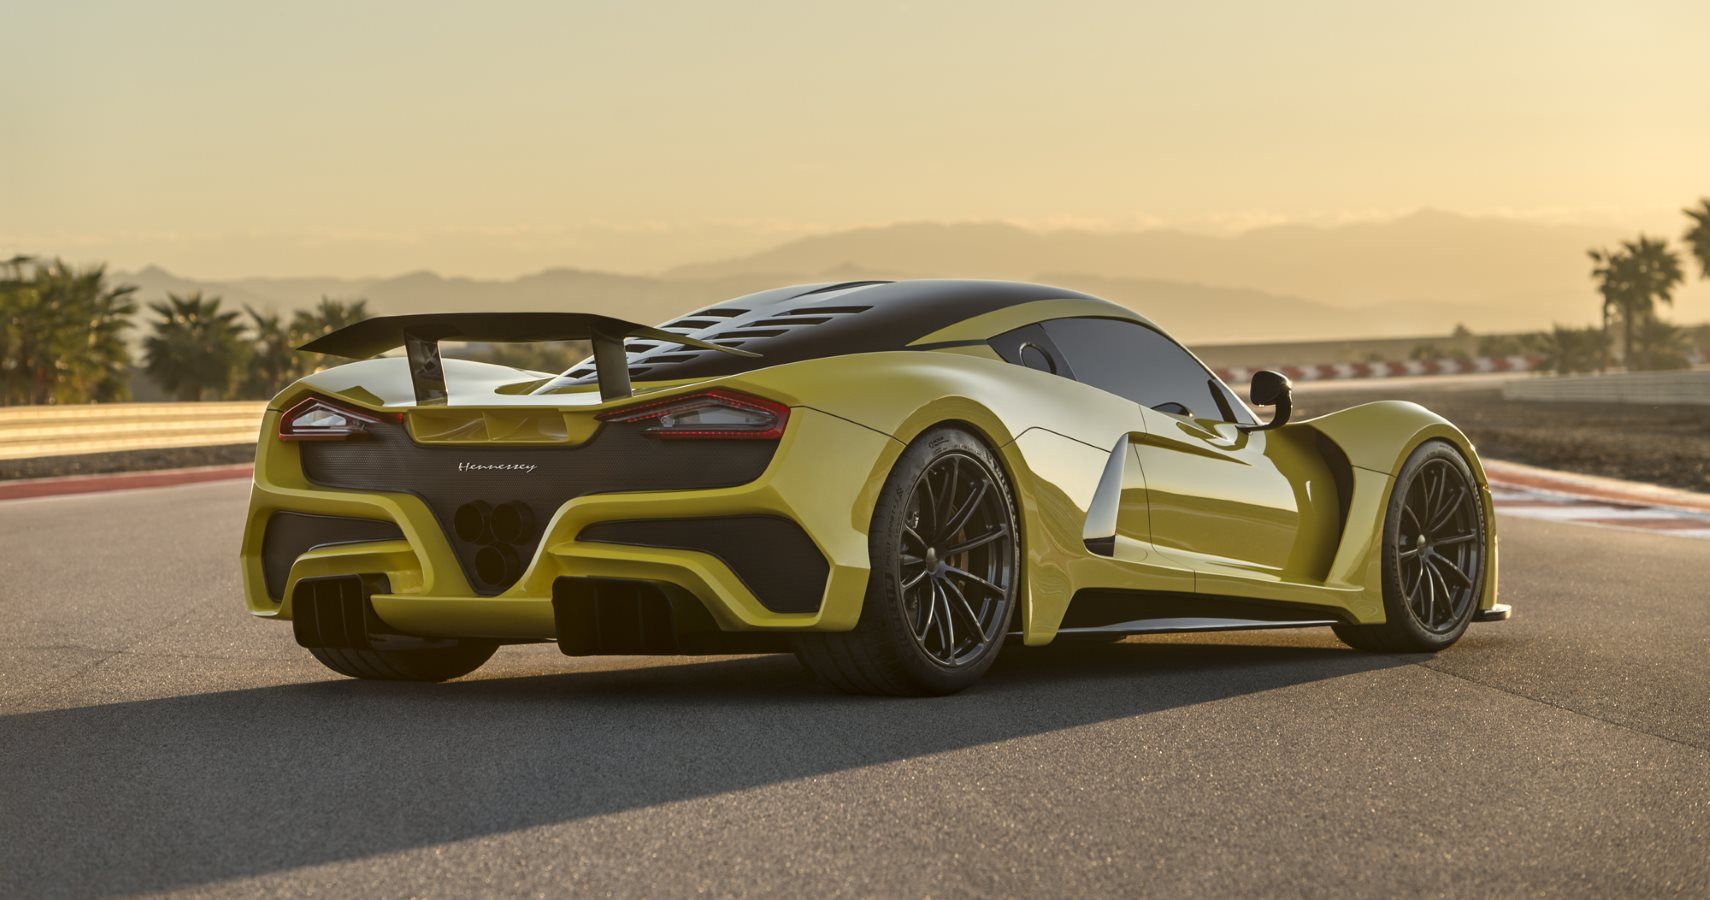 Hennessey F5 Venom Is Aiming For Top Speed Of 311 MPH